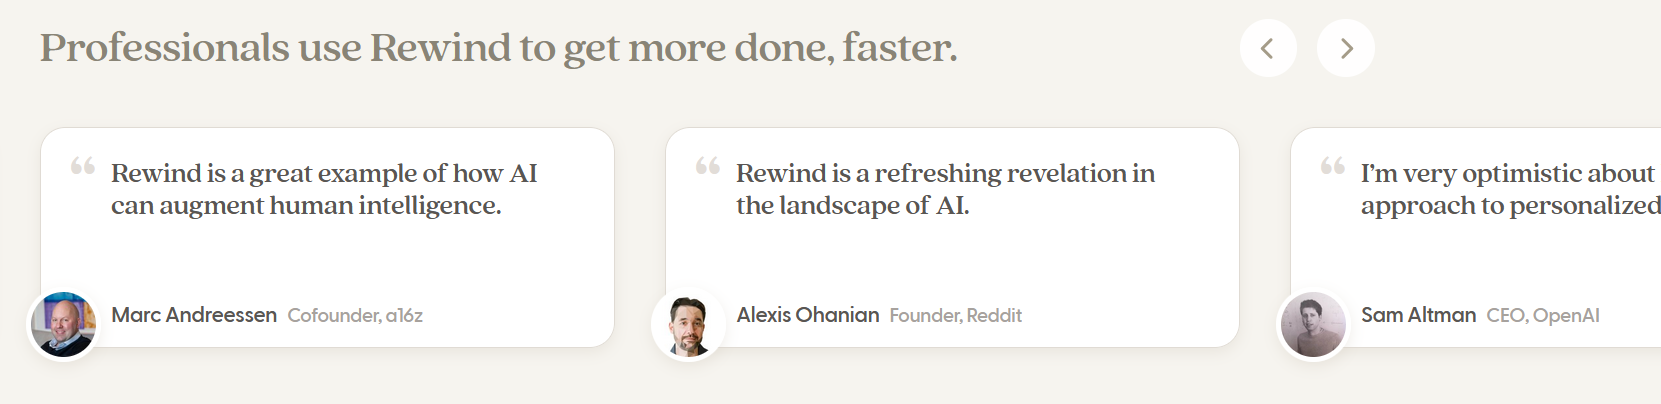 Recommended by Andreessen, Altman and Reddit founder